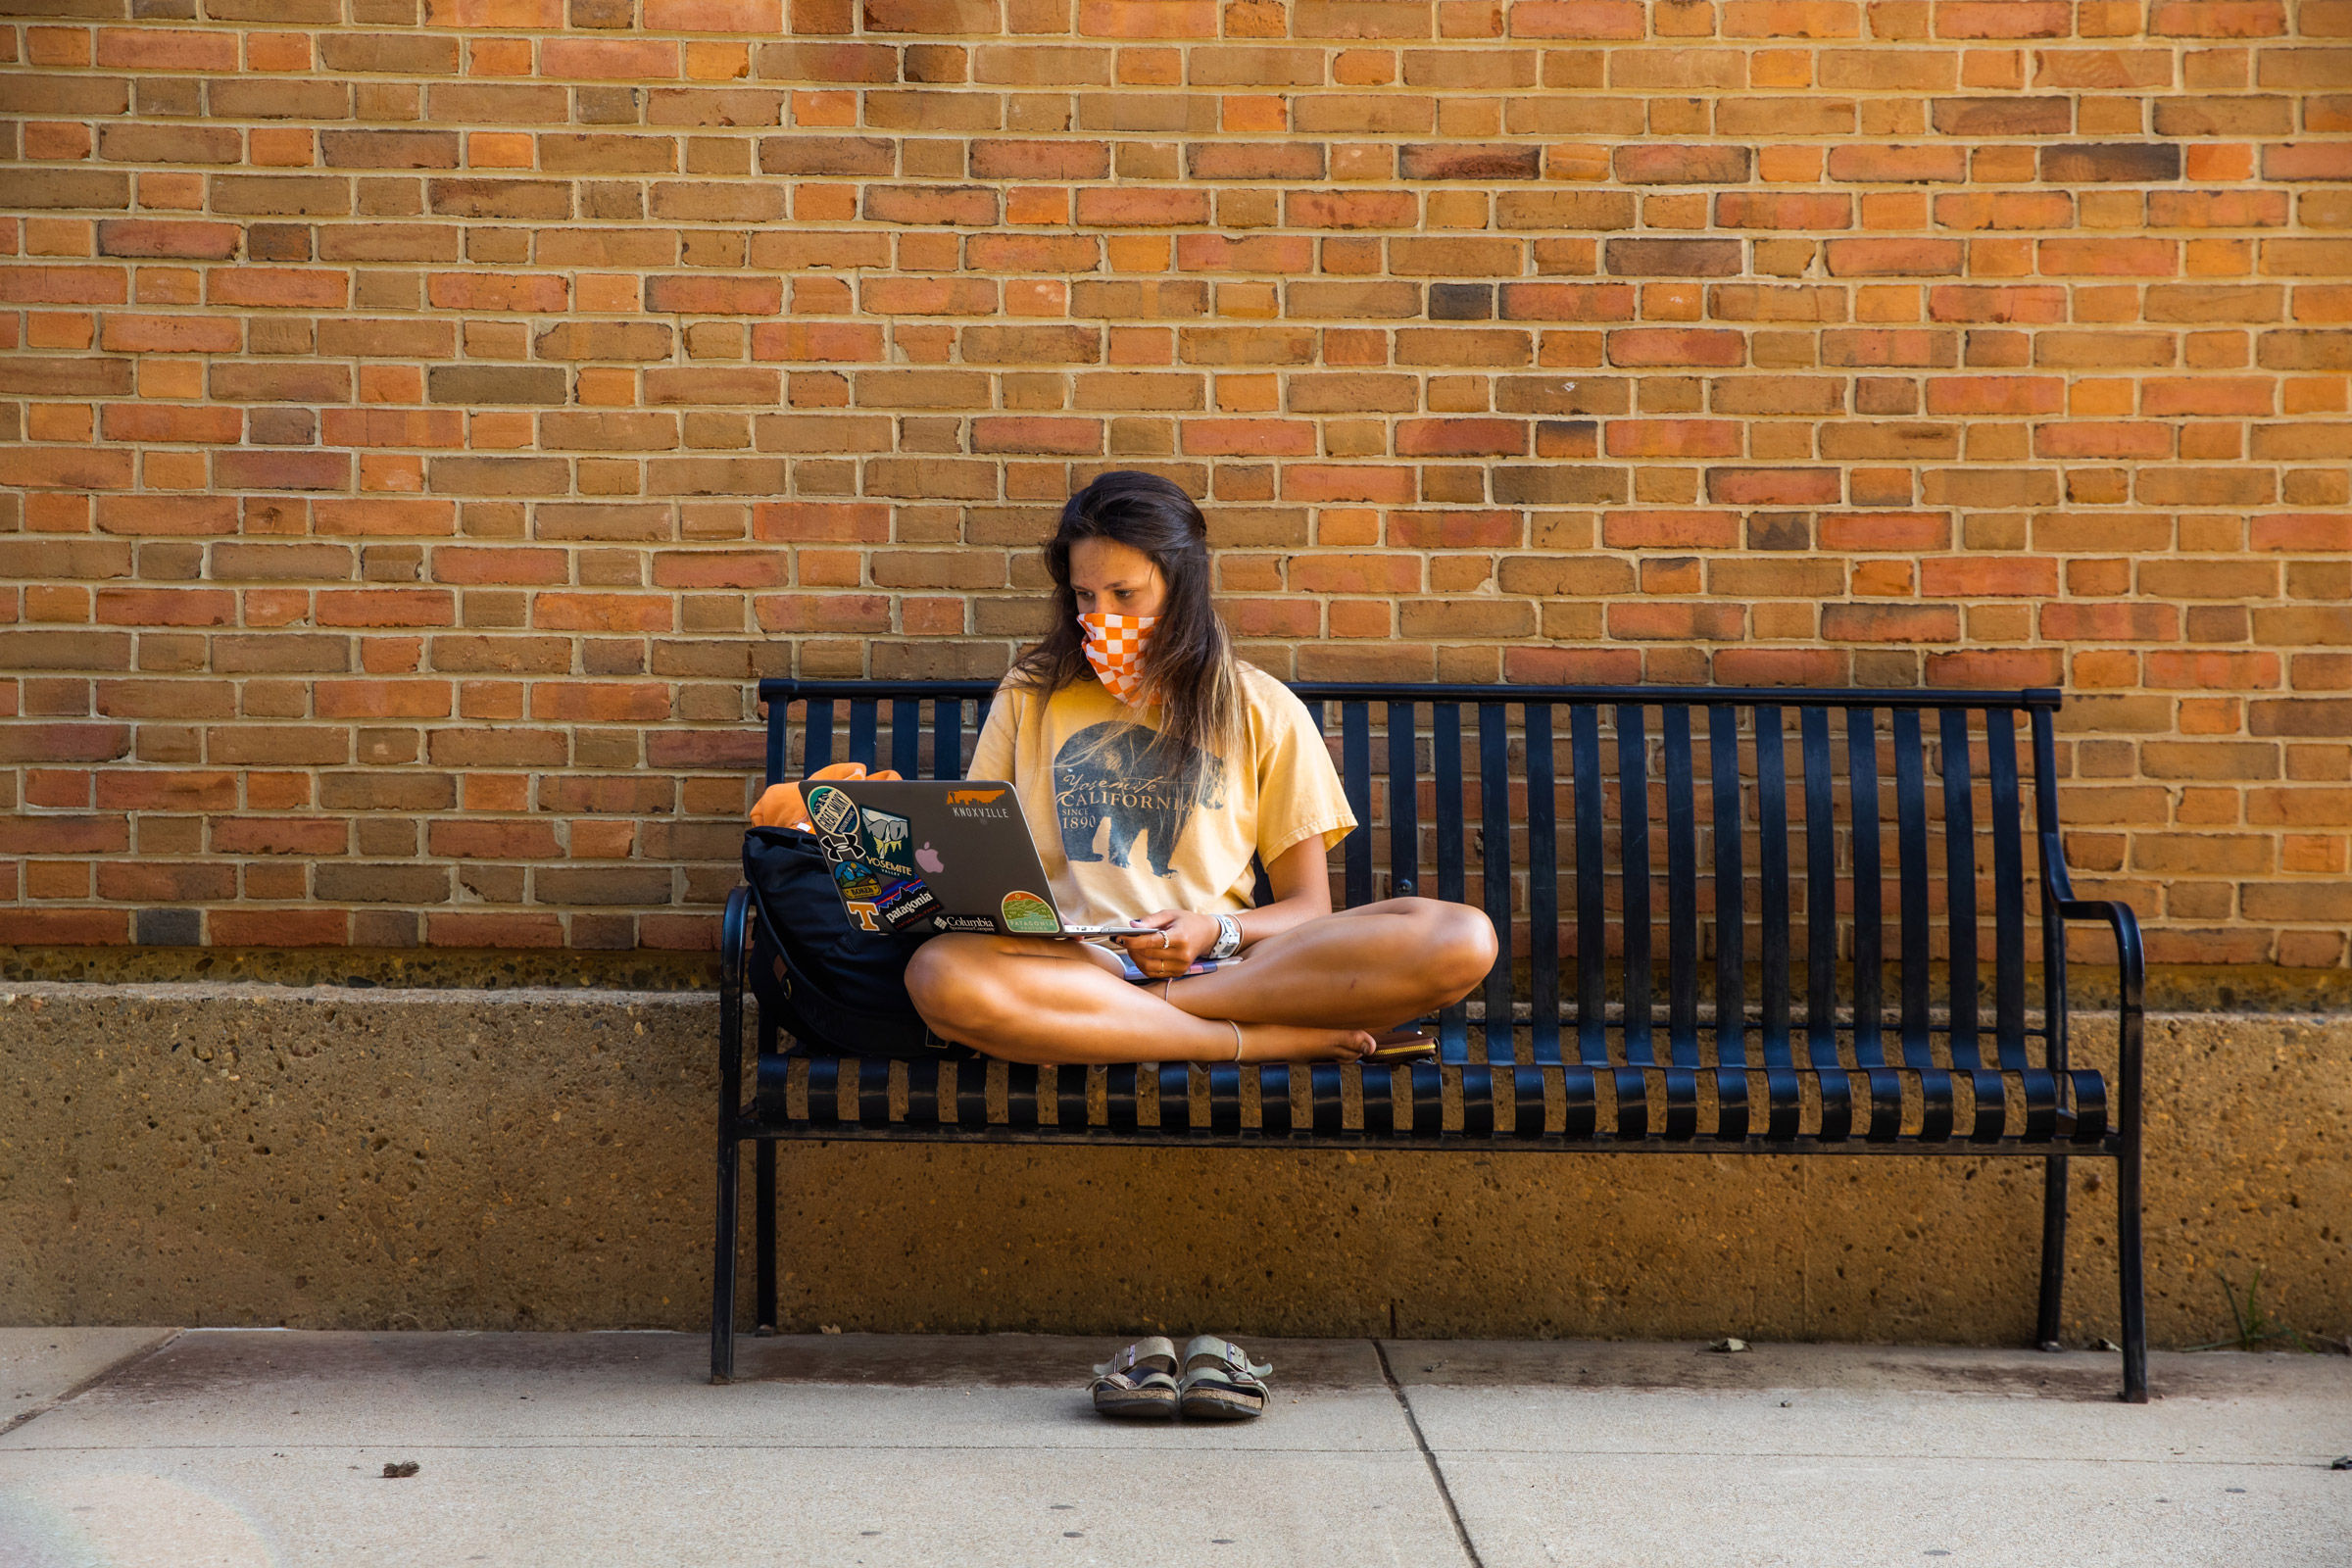 A young woman studies on a bench in the UT Humanities Plaza